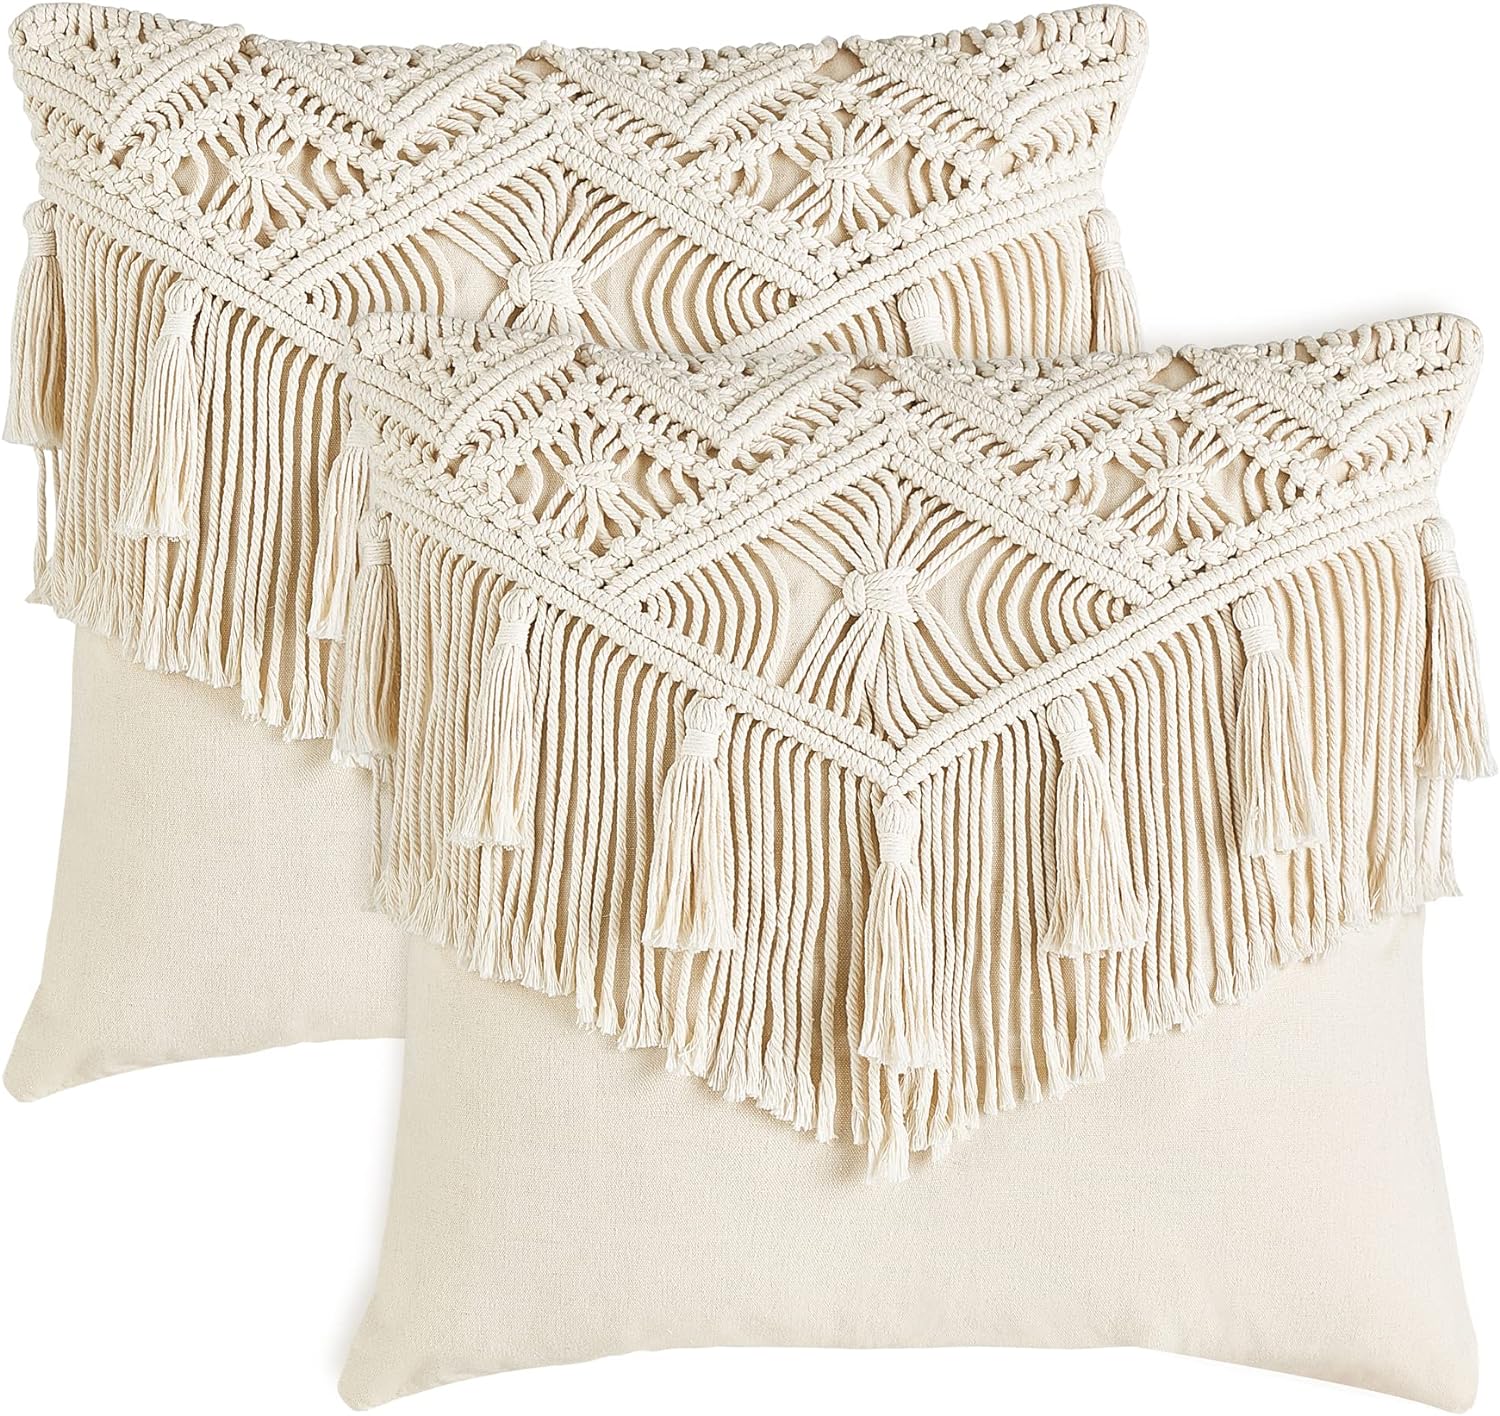 Mkono Boho Throw Pillow Covers, Macrame Square Pillow Cases with Tassels for Bed Sofa Bench Car Stylish Cushion Room Decor, Christmas New Year Gifts, Set of 2 Decorative Cushion Cover (17x17)